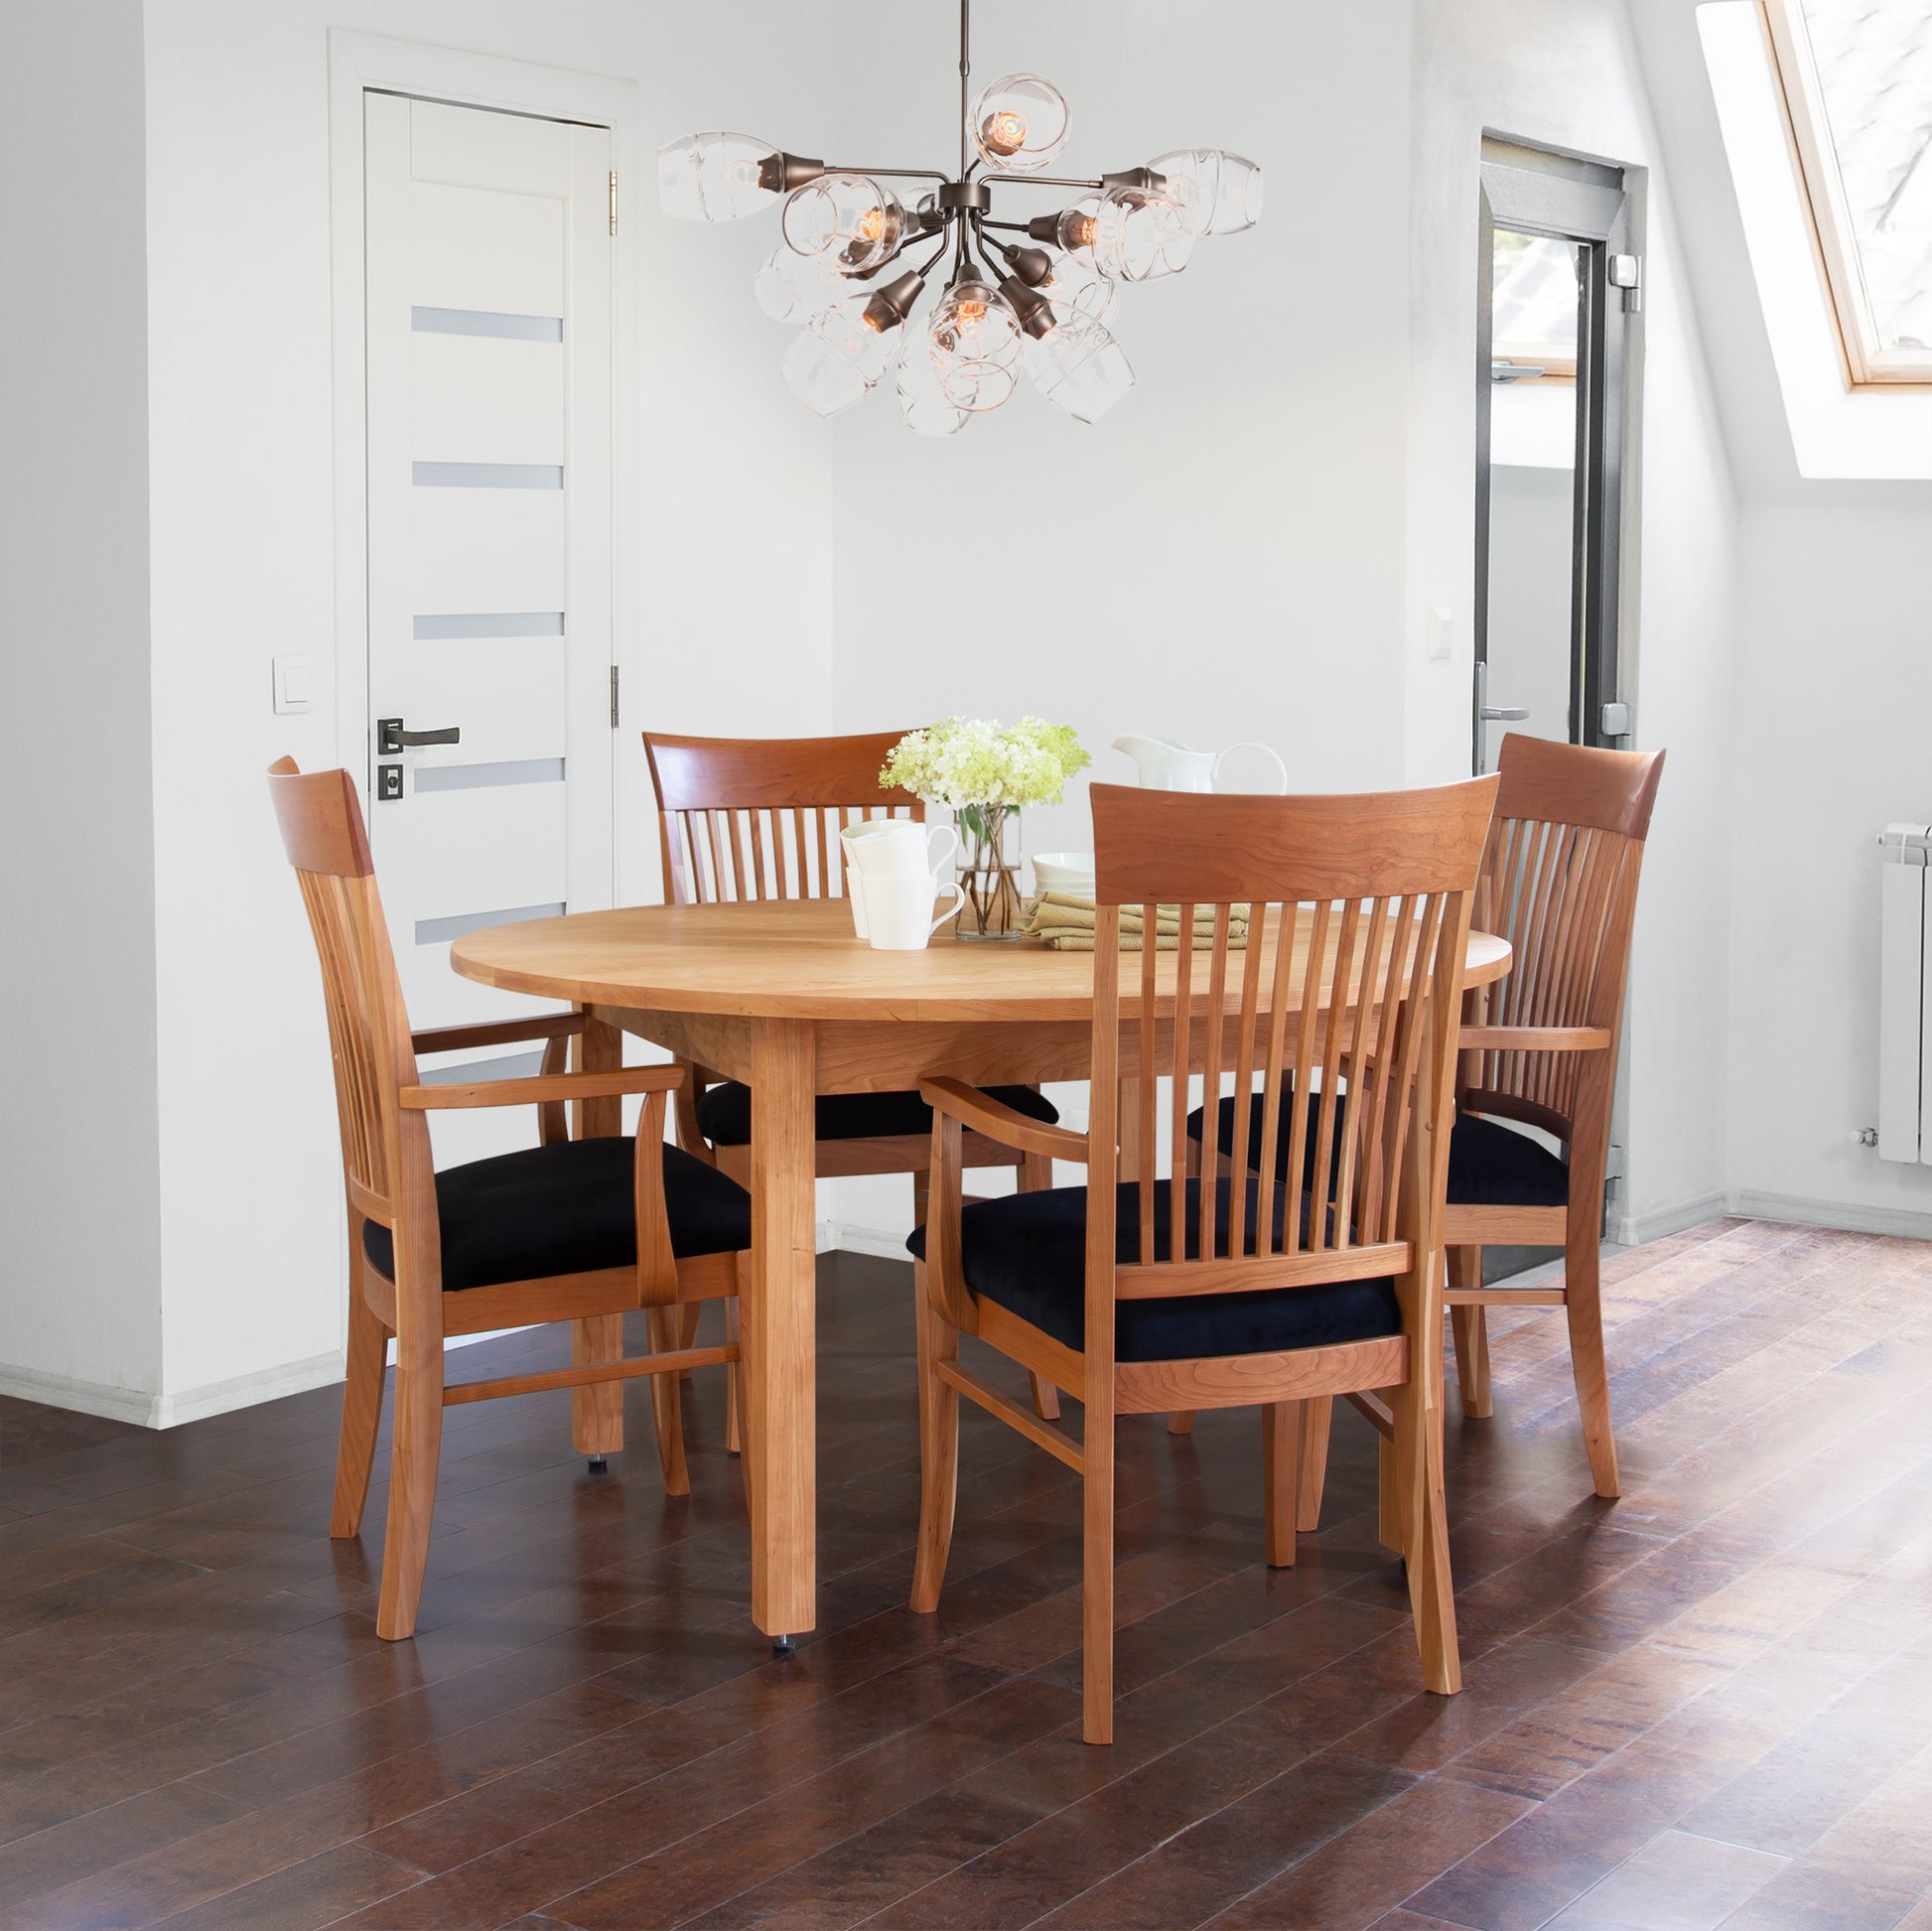 A modern dining room featuring a handcrafted Vermont Furniture Designs Burlington Shaker Round Solid Top Dining Table with six chairs, a decorative light fixture above, and flowers in a vase on the table, against a backdrop of white walls and a slo